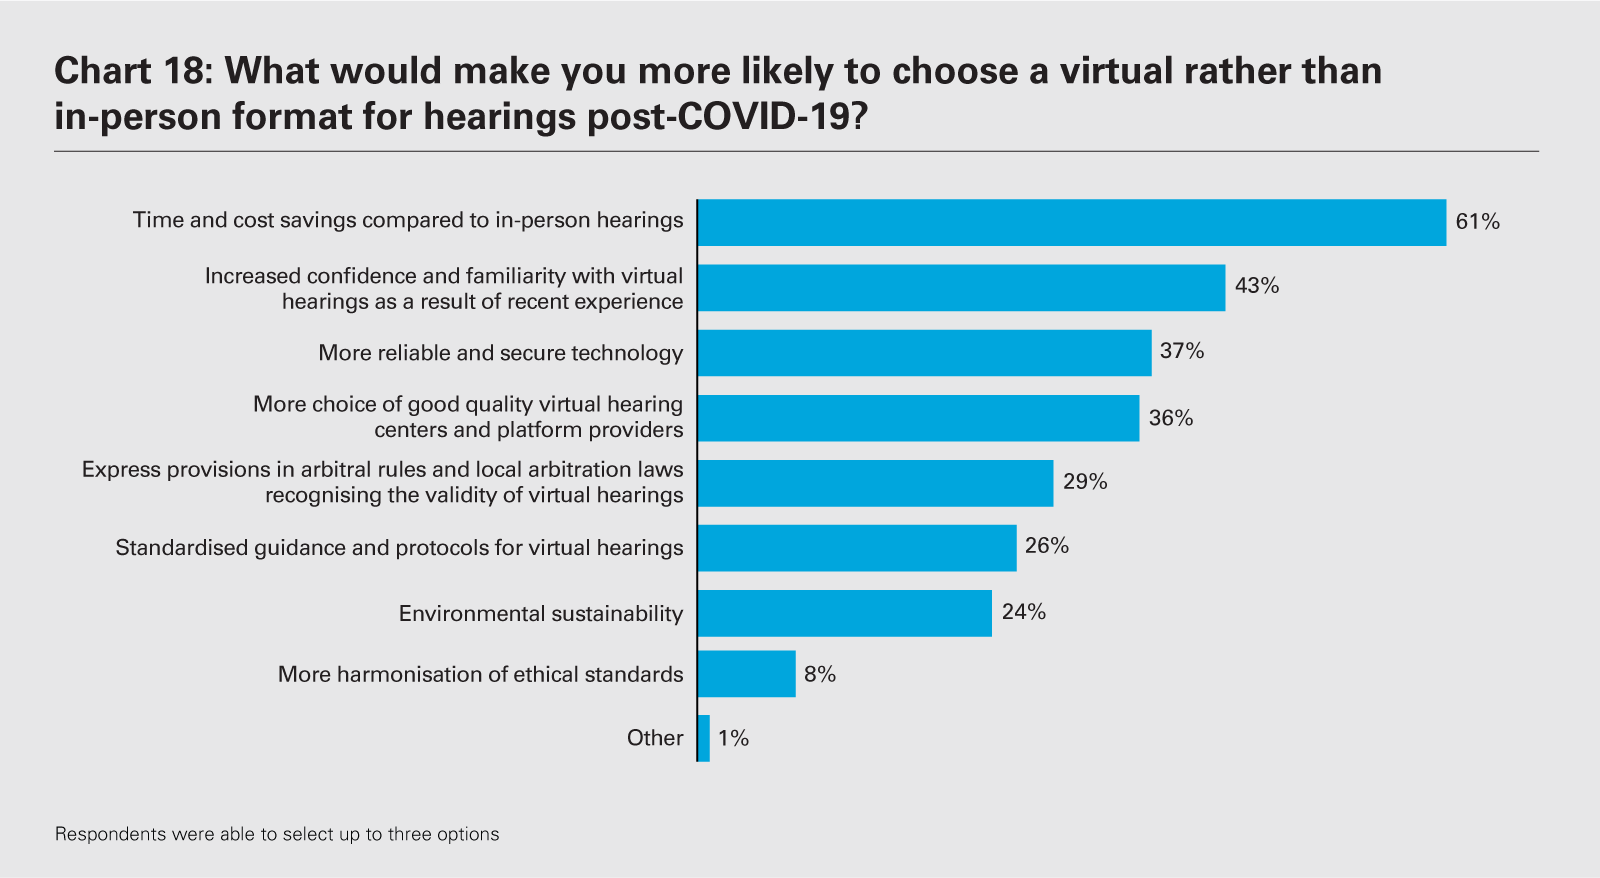 Chart 18: What would make you more likely to choose a virtual rather than in-person format for hearings post-COVID-19?